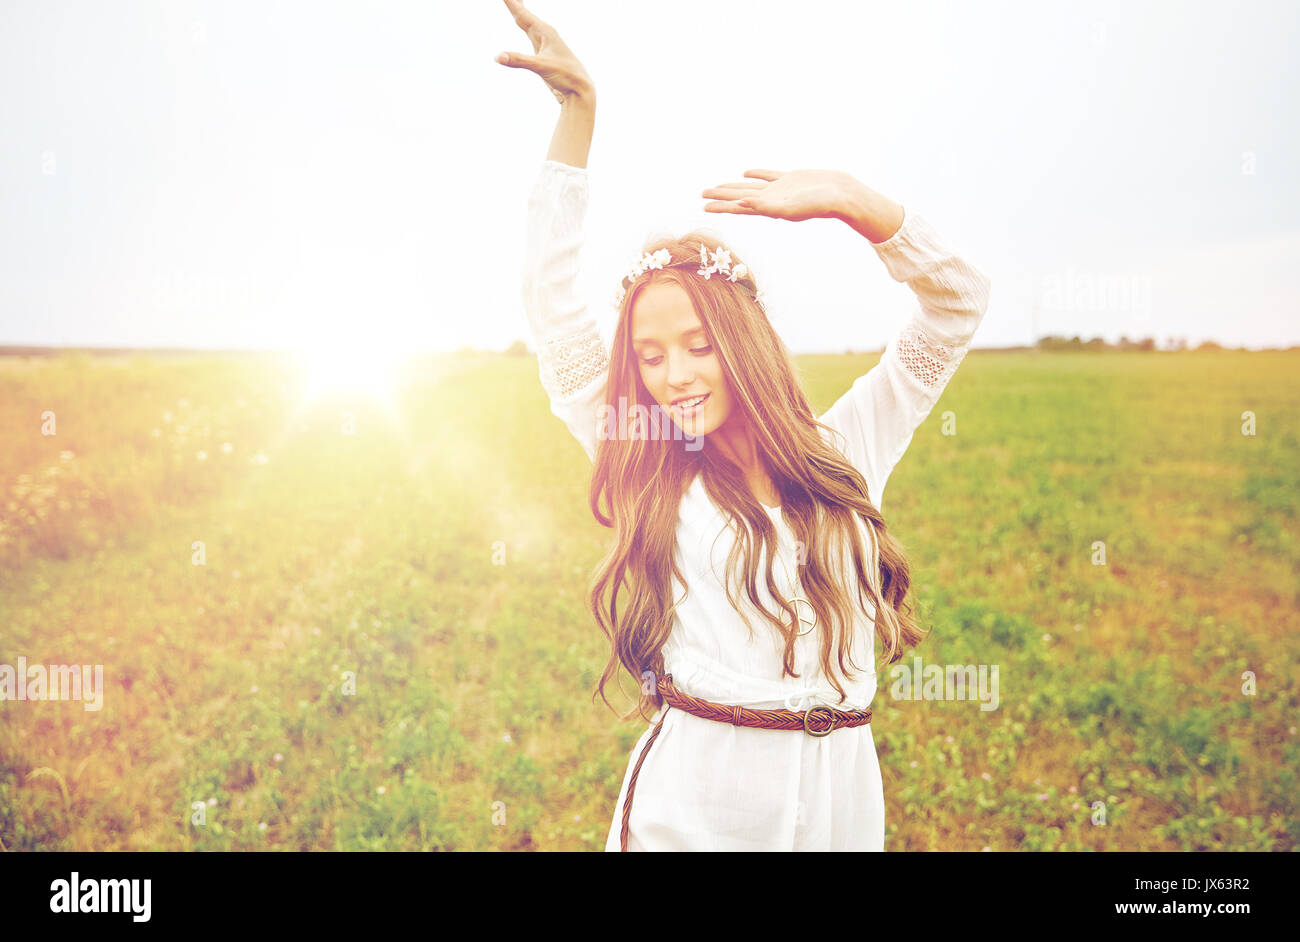 smiling young hippie woman on cereal field Stock Photo